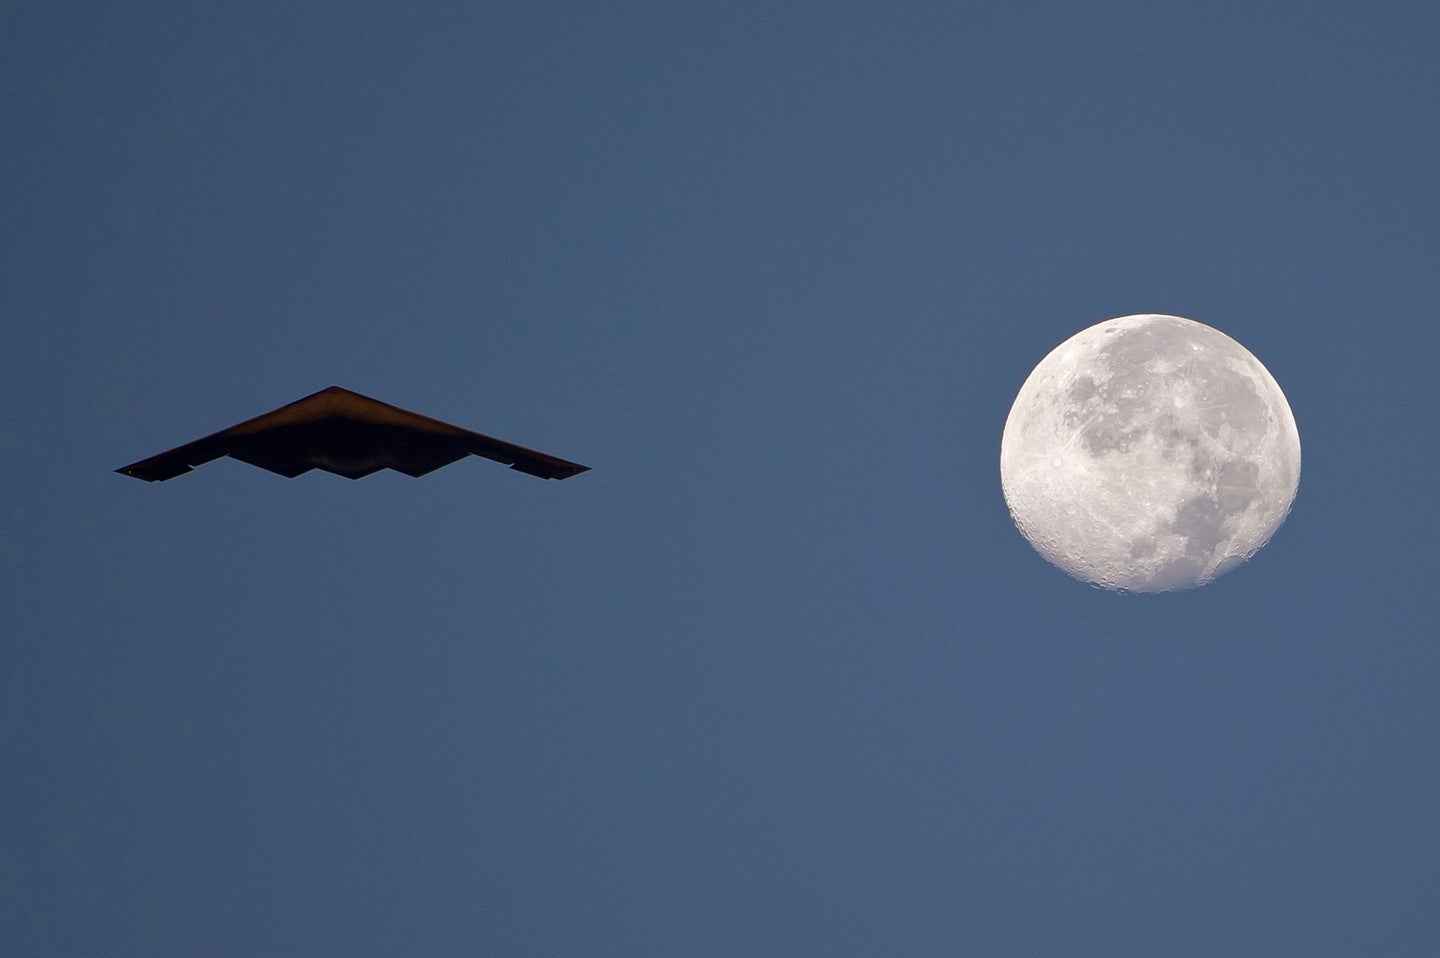 Air Force B-2 Spirit stealth bomber silhouetted next to a full moon